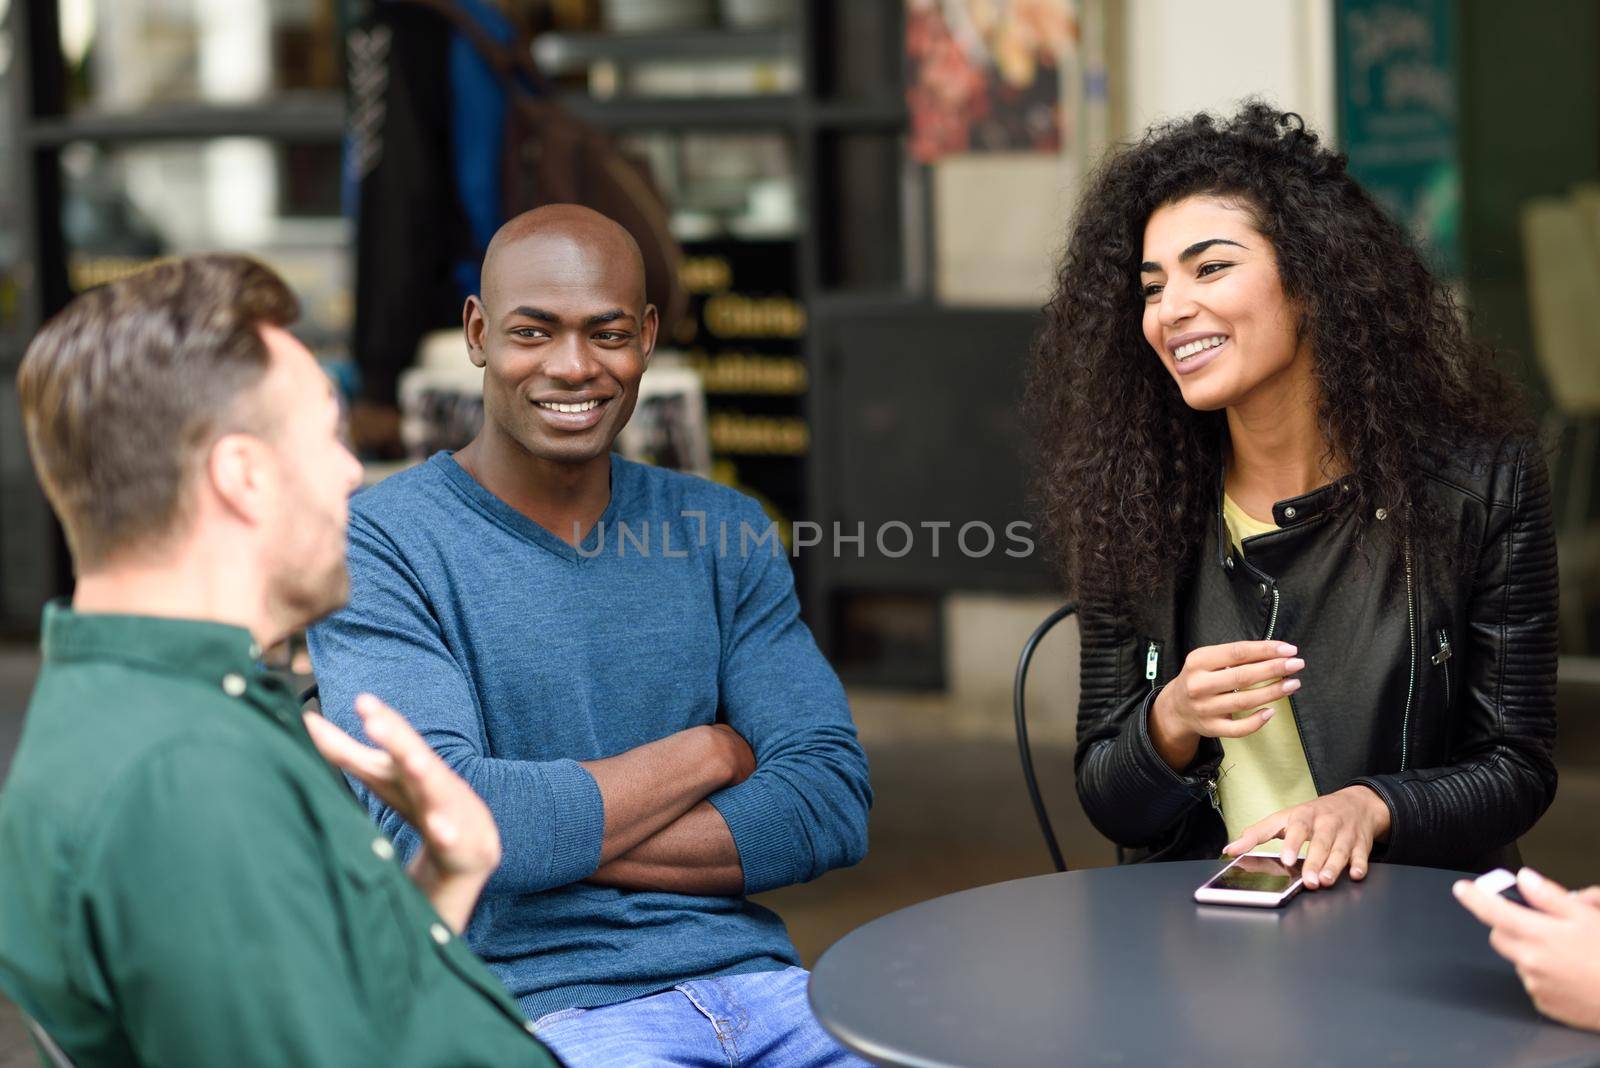 Multiracial group of friends waiting for a coffee together. Two men and a man sitting at cafe, talking and smiling. Lifestyle and friendship concepts with real people models